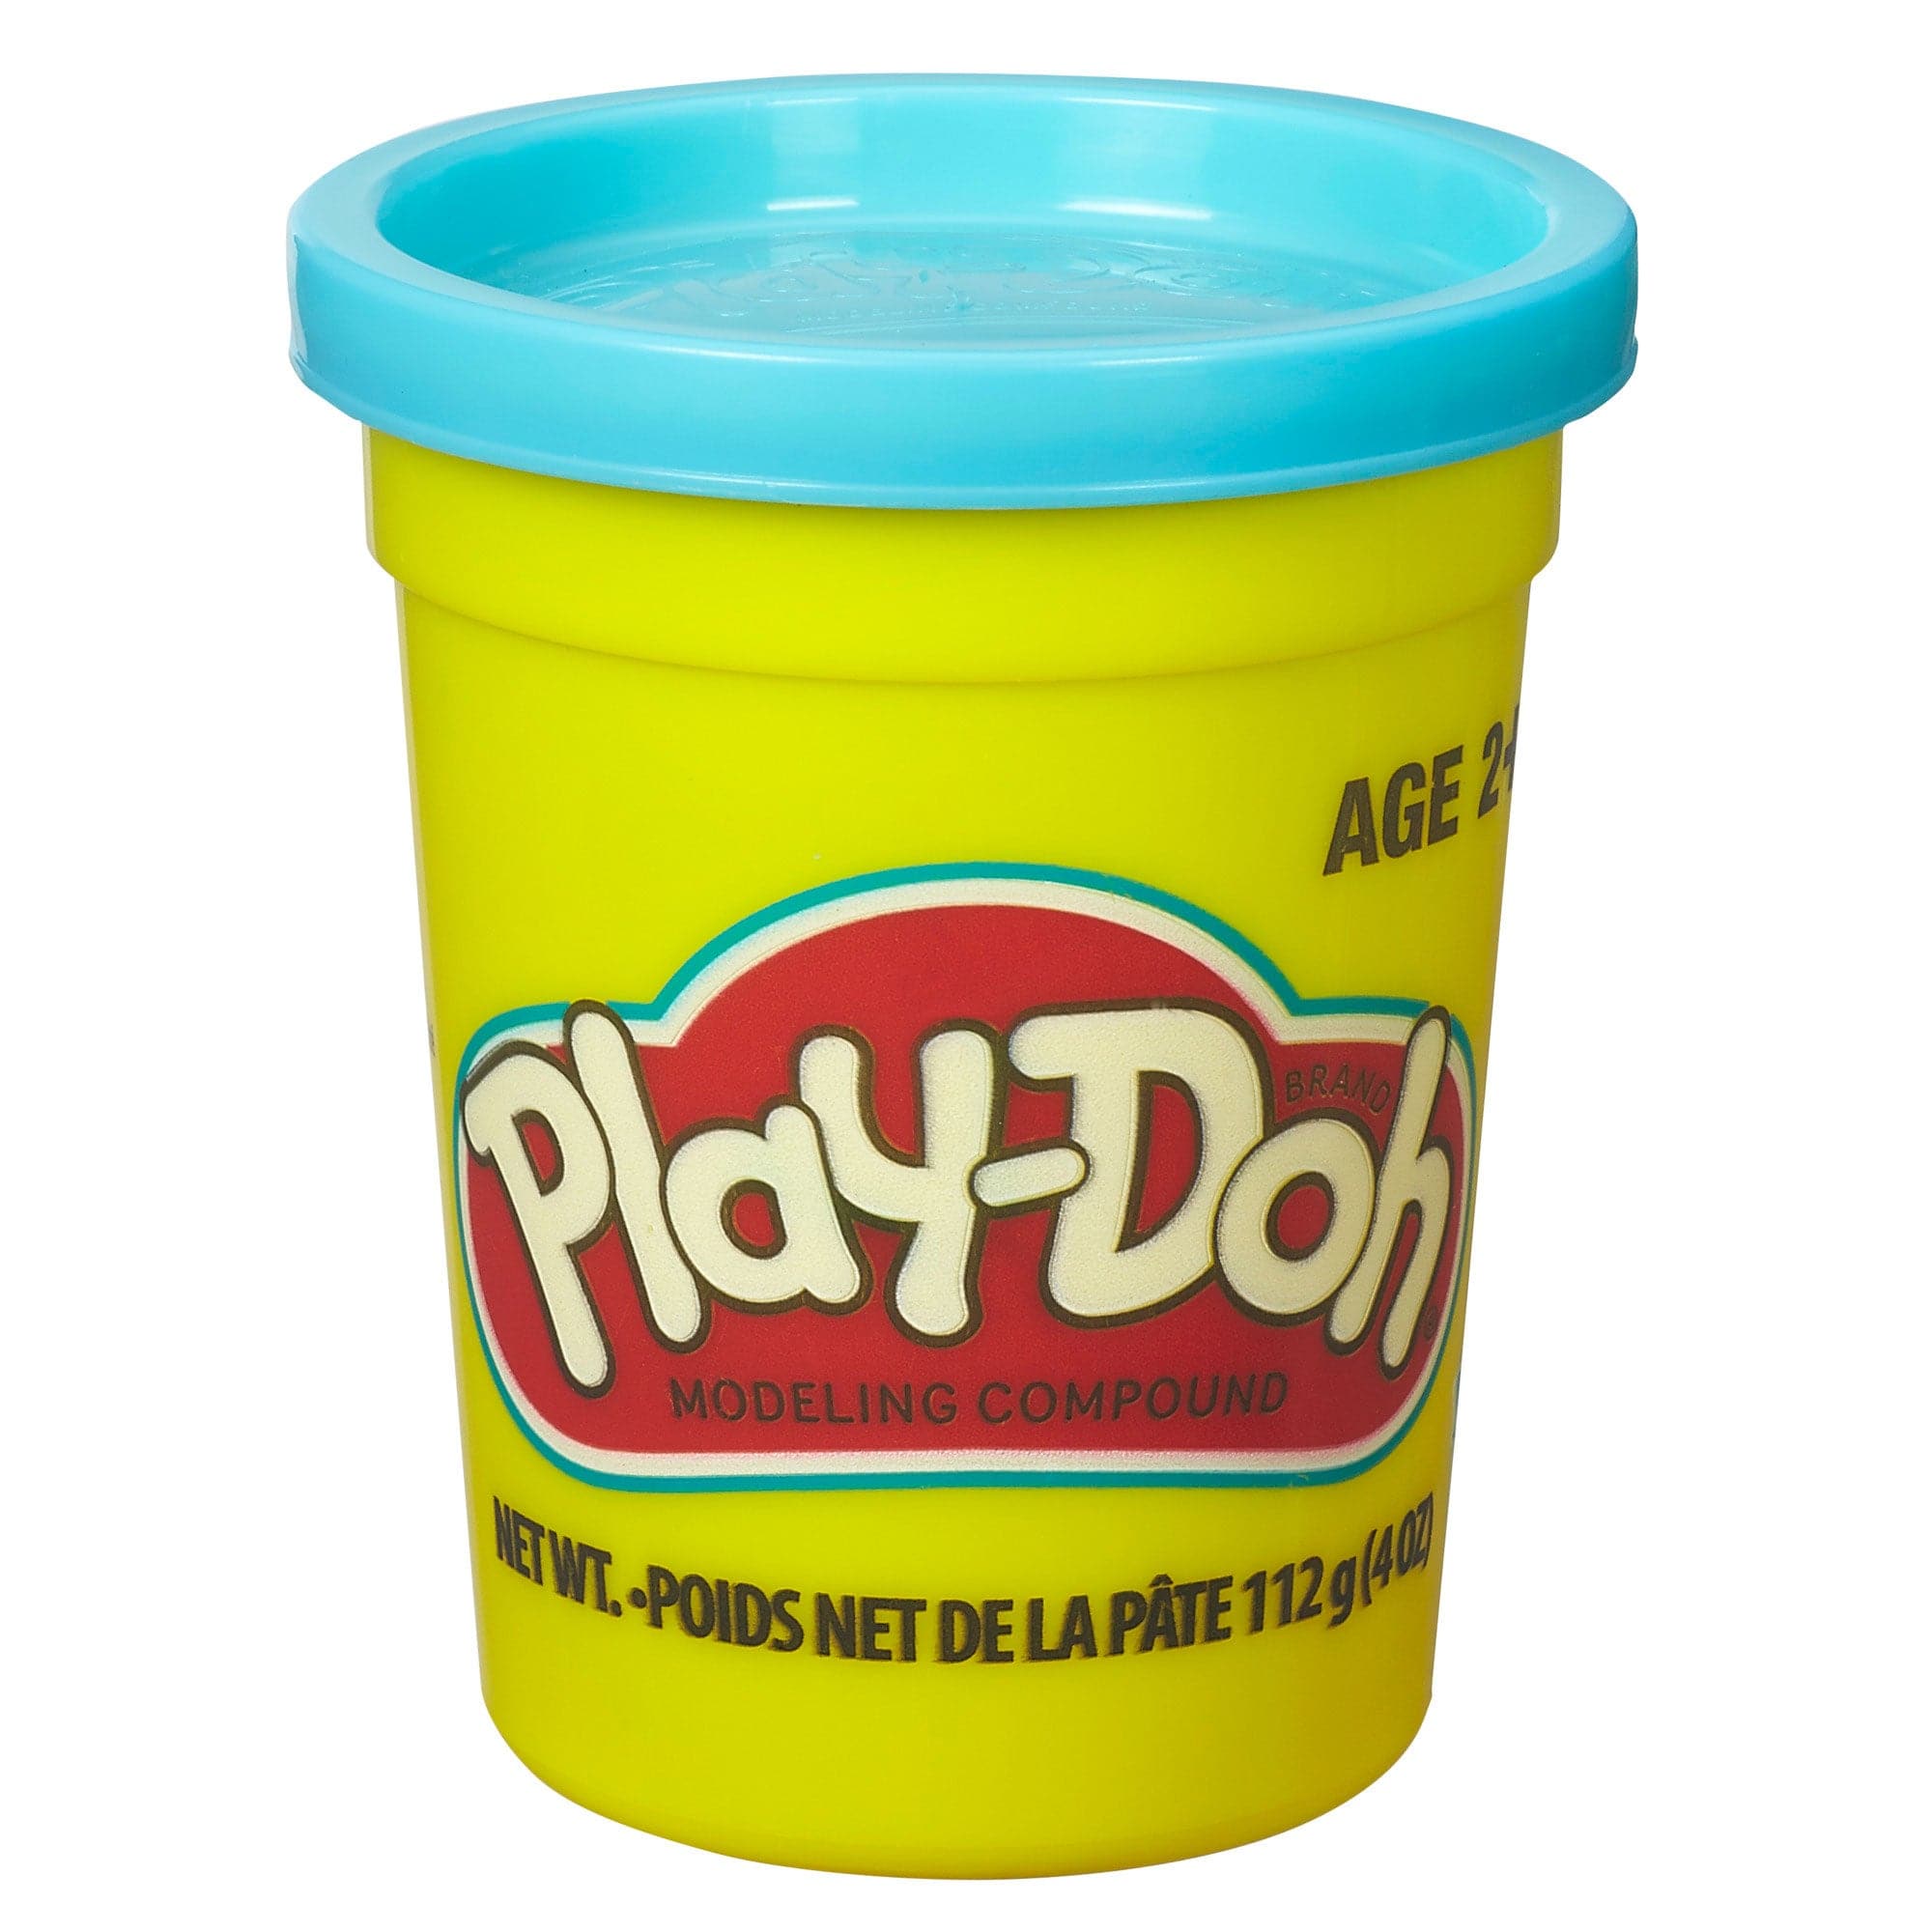 Play-Doh Other Items in Toys & Collectibles